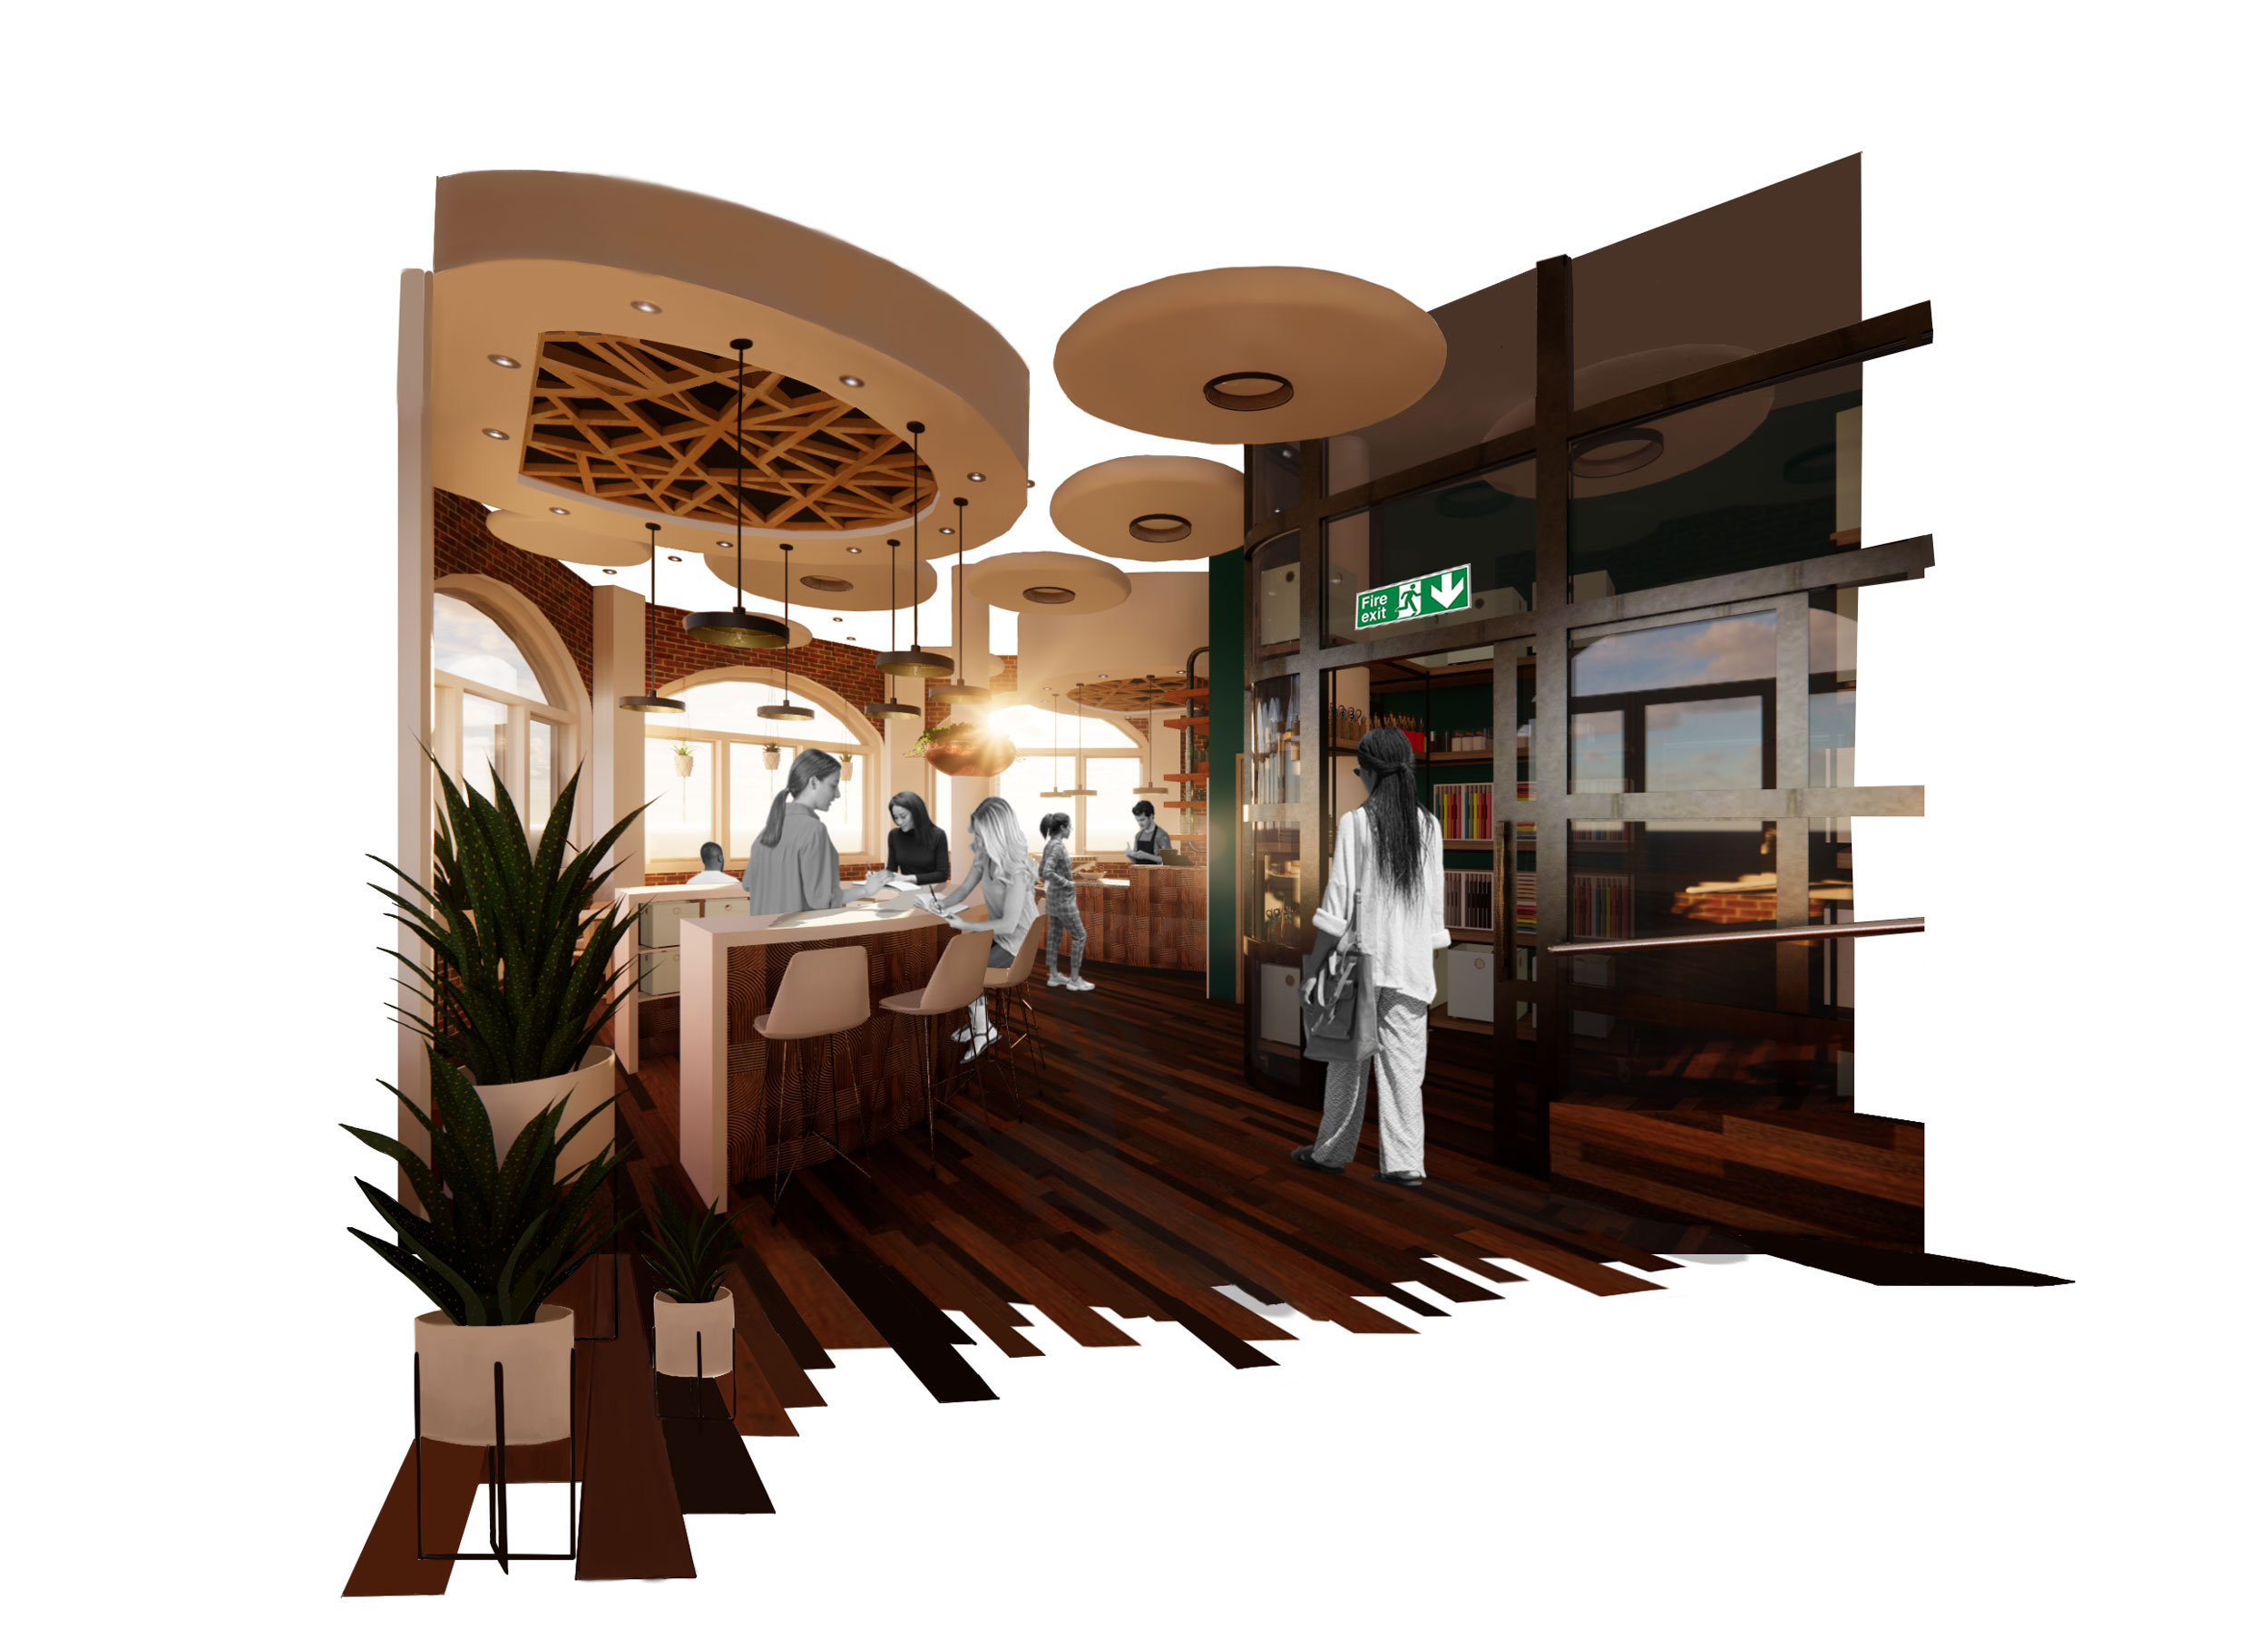 Exhibition studio space render by Lucy Cave showing a studio/ cafe space design. Dark wood floors, circular lighting, plants and large windows.